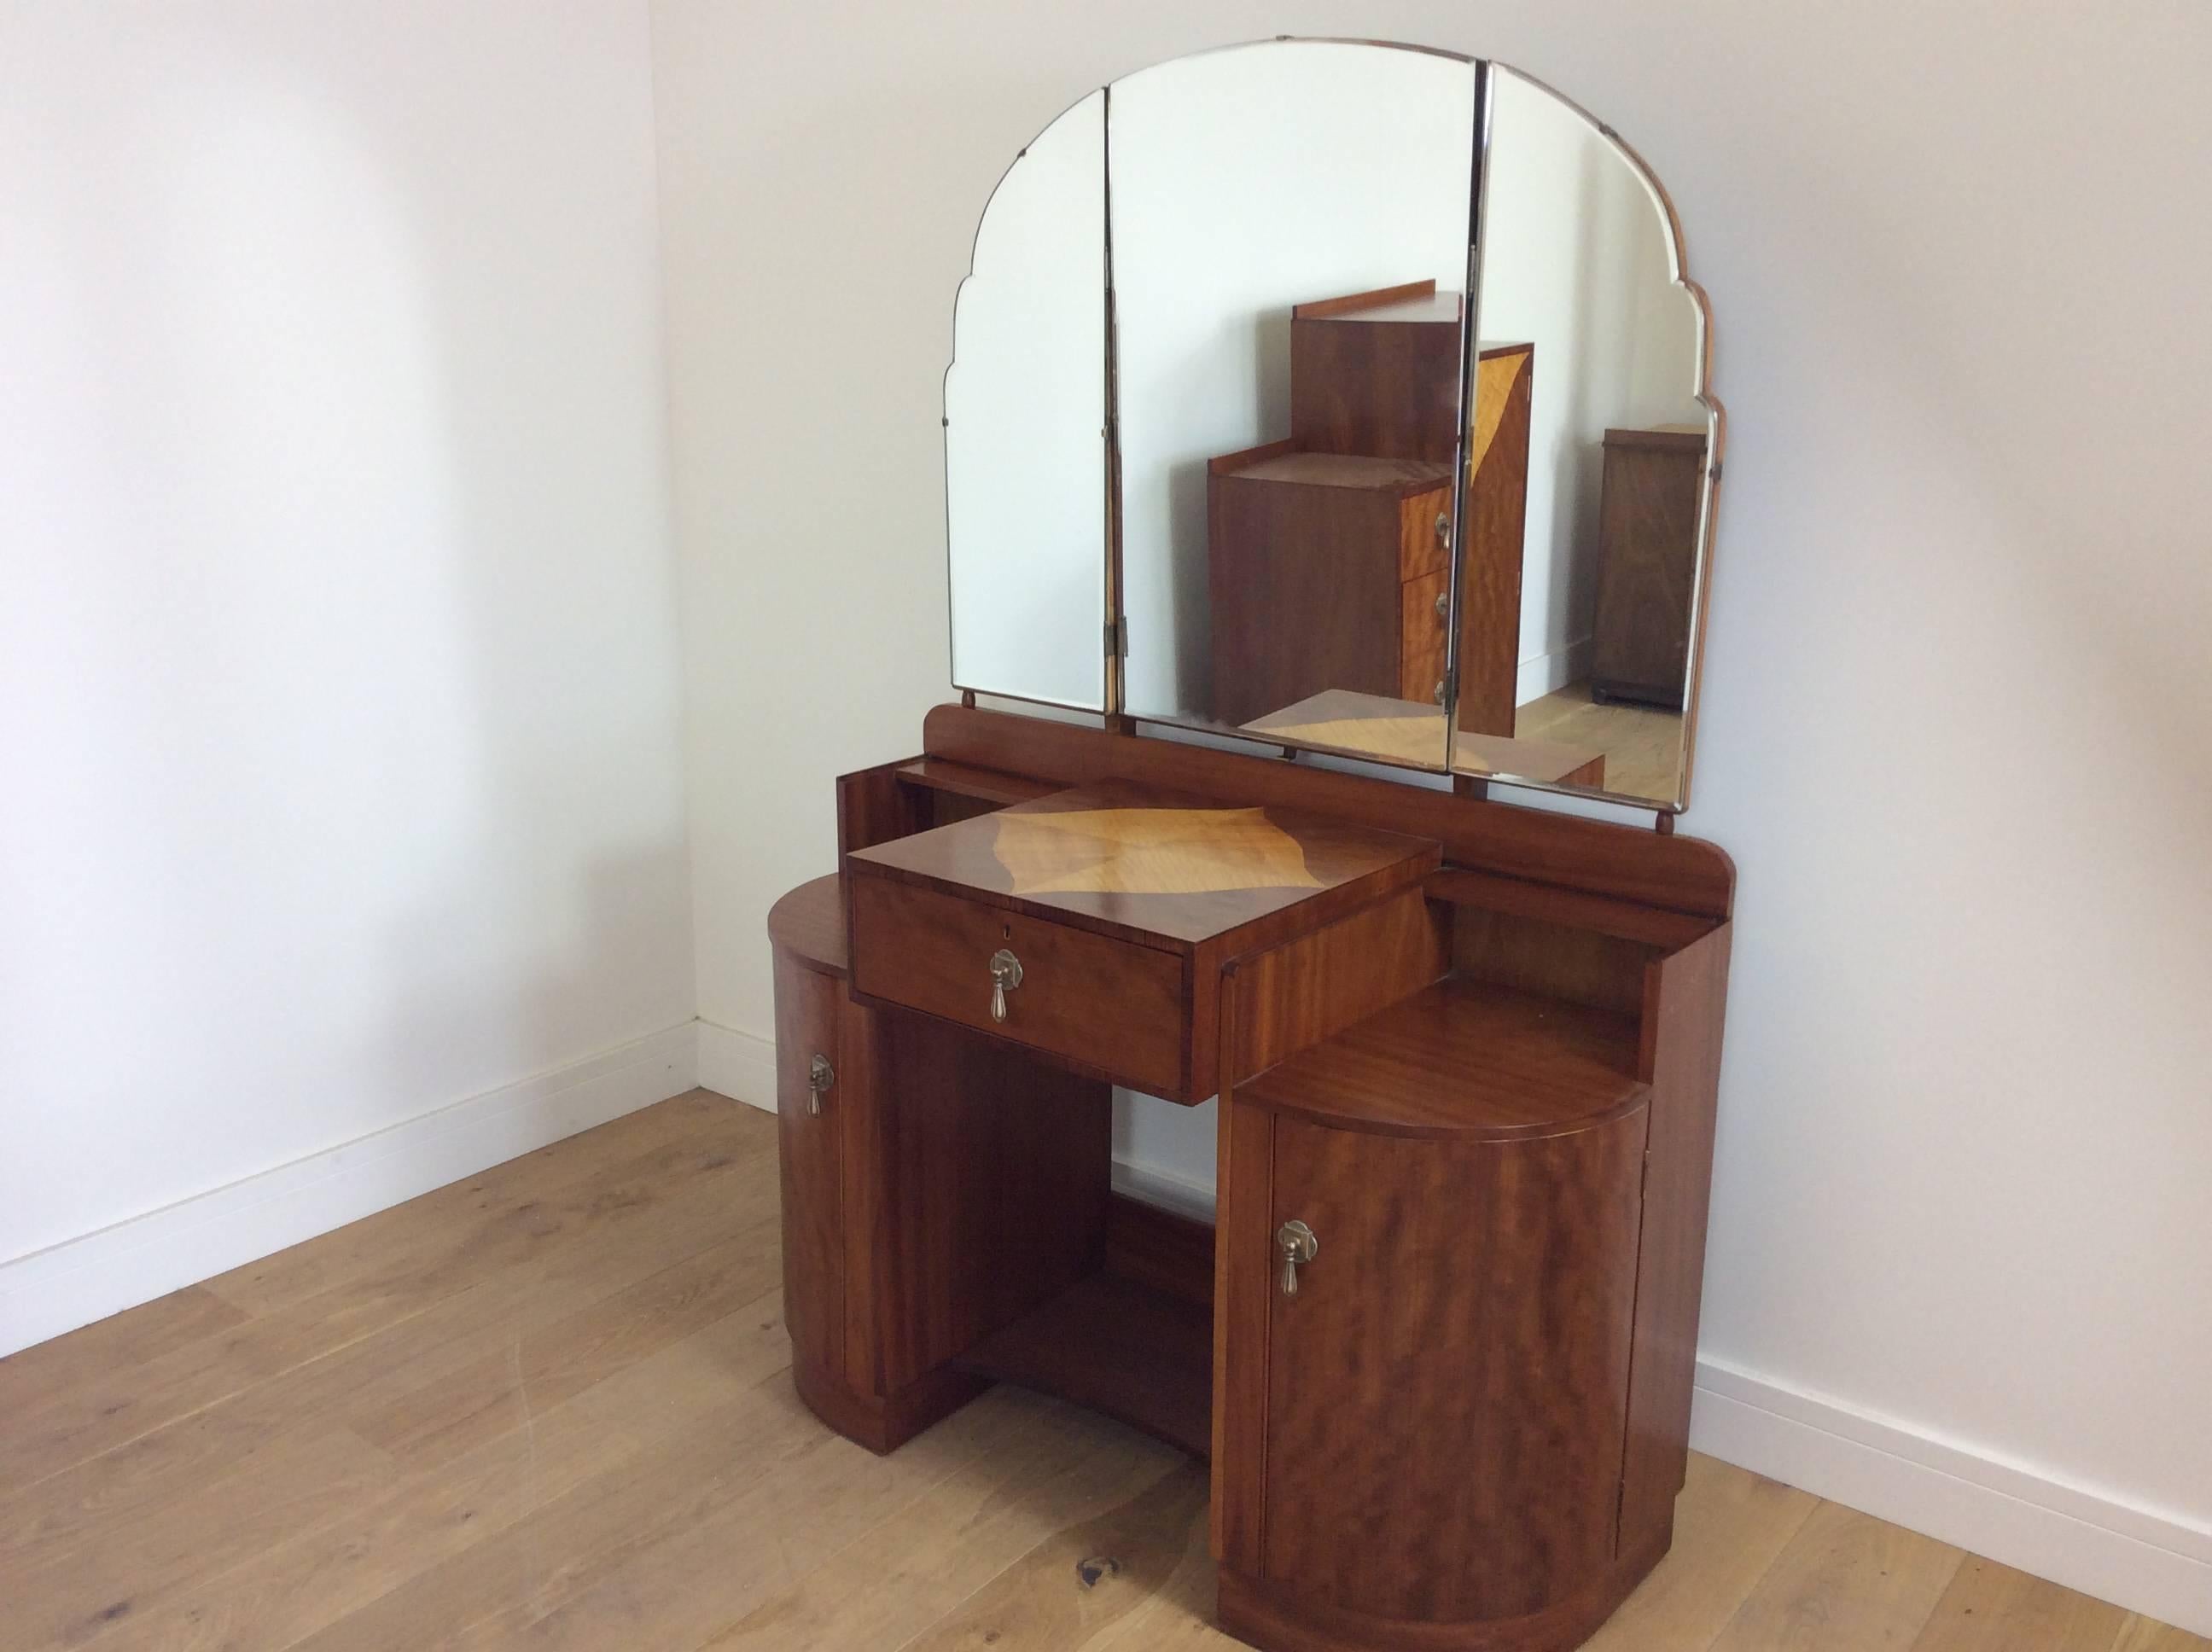 Art Deco bedroom set.
Art Deco bedroom suite, wardrobe, tallboy and dressing table by maple and Co, fine quality in satin walnut with satin maple detail and bronze handles.
Measures: Wardrobe 194 cm H, 122 cm W, 49 cm D
Tallboy 117 cm H, 84 cm W,